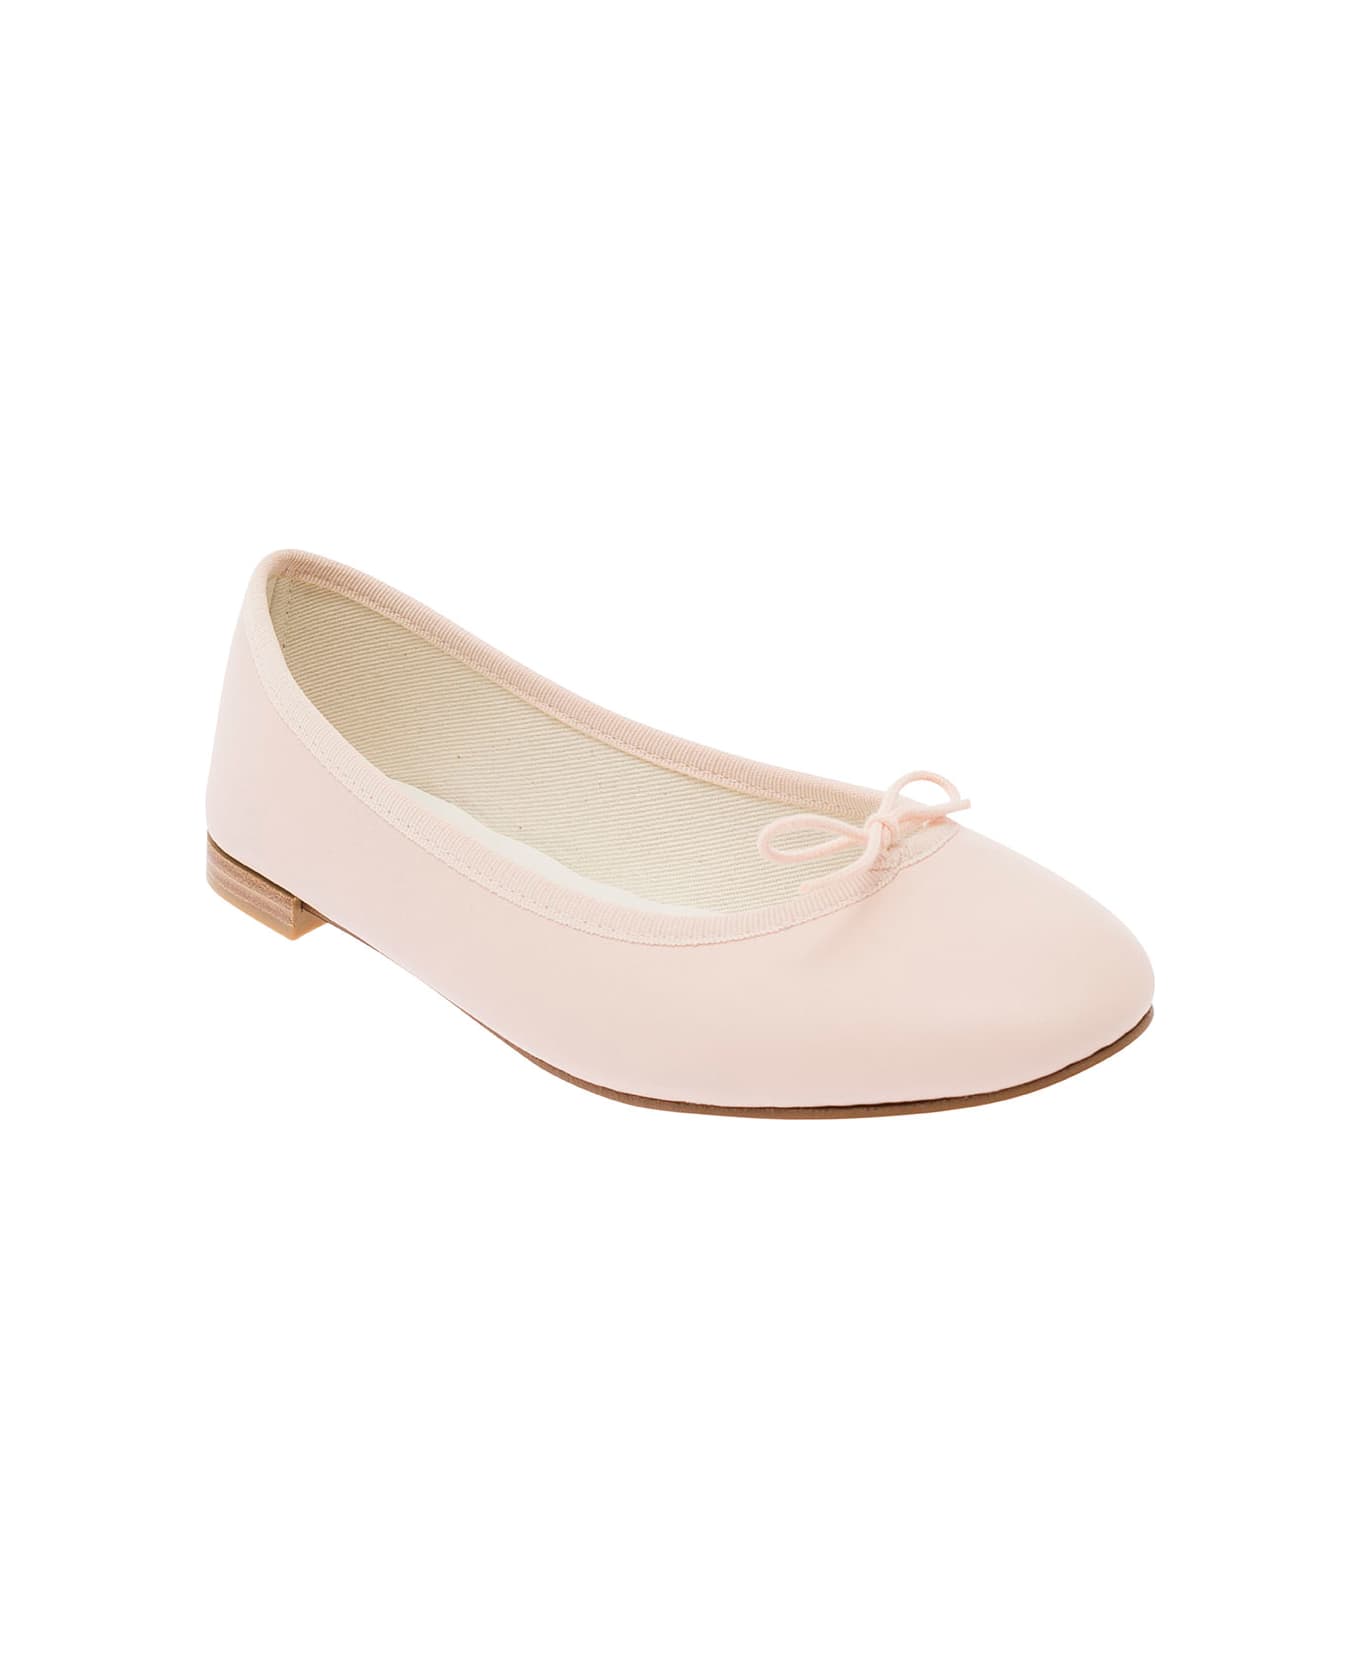 Repetto 'cendrillon' Pink Ballet Flats With Bow Detail In Smooth Leather Woman - Pink